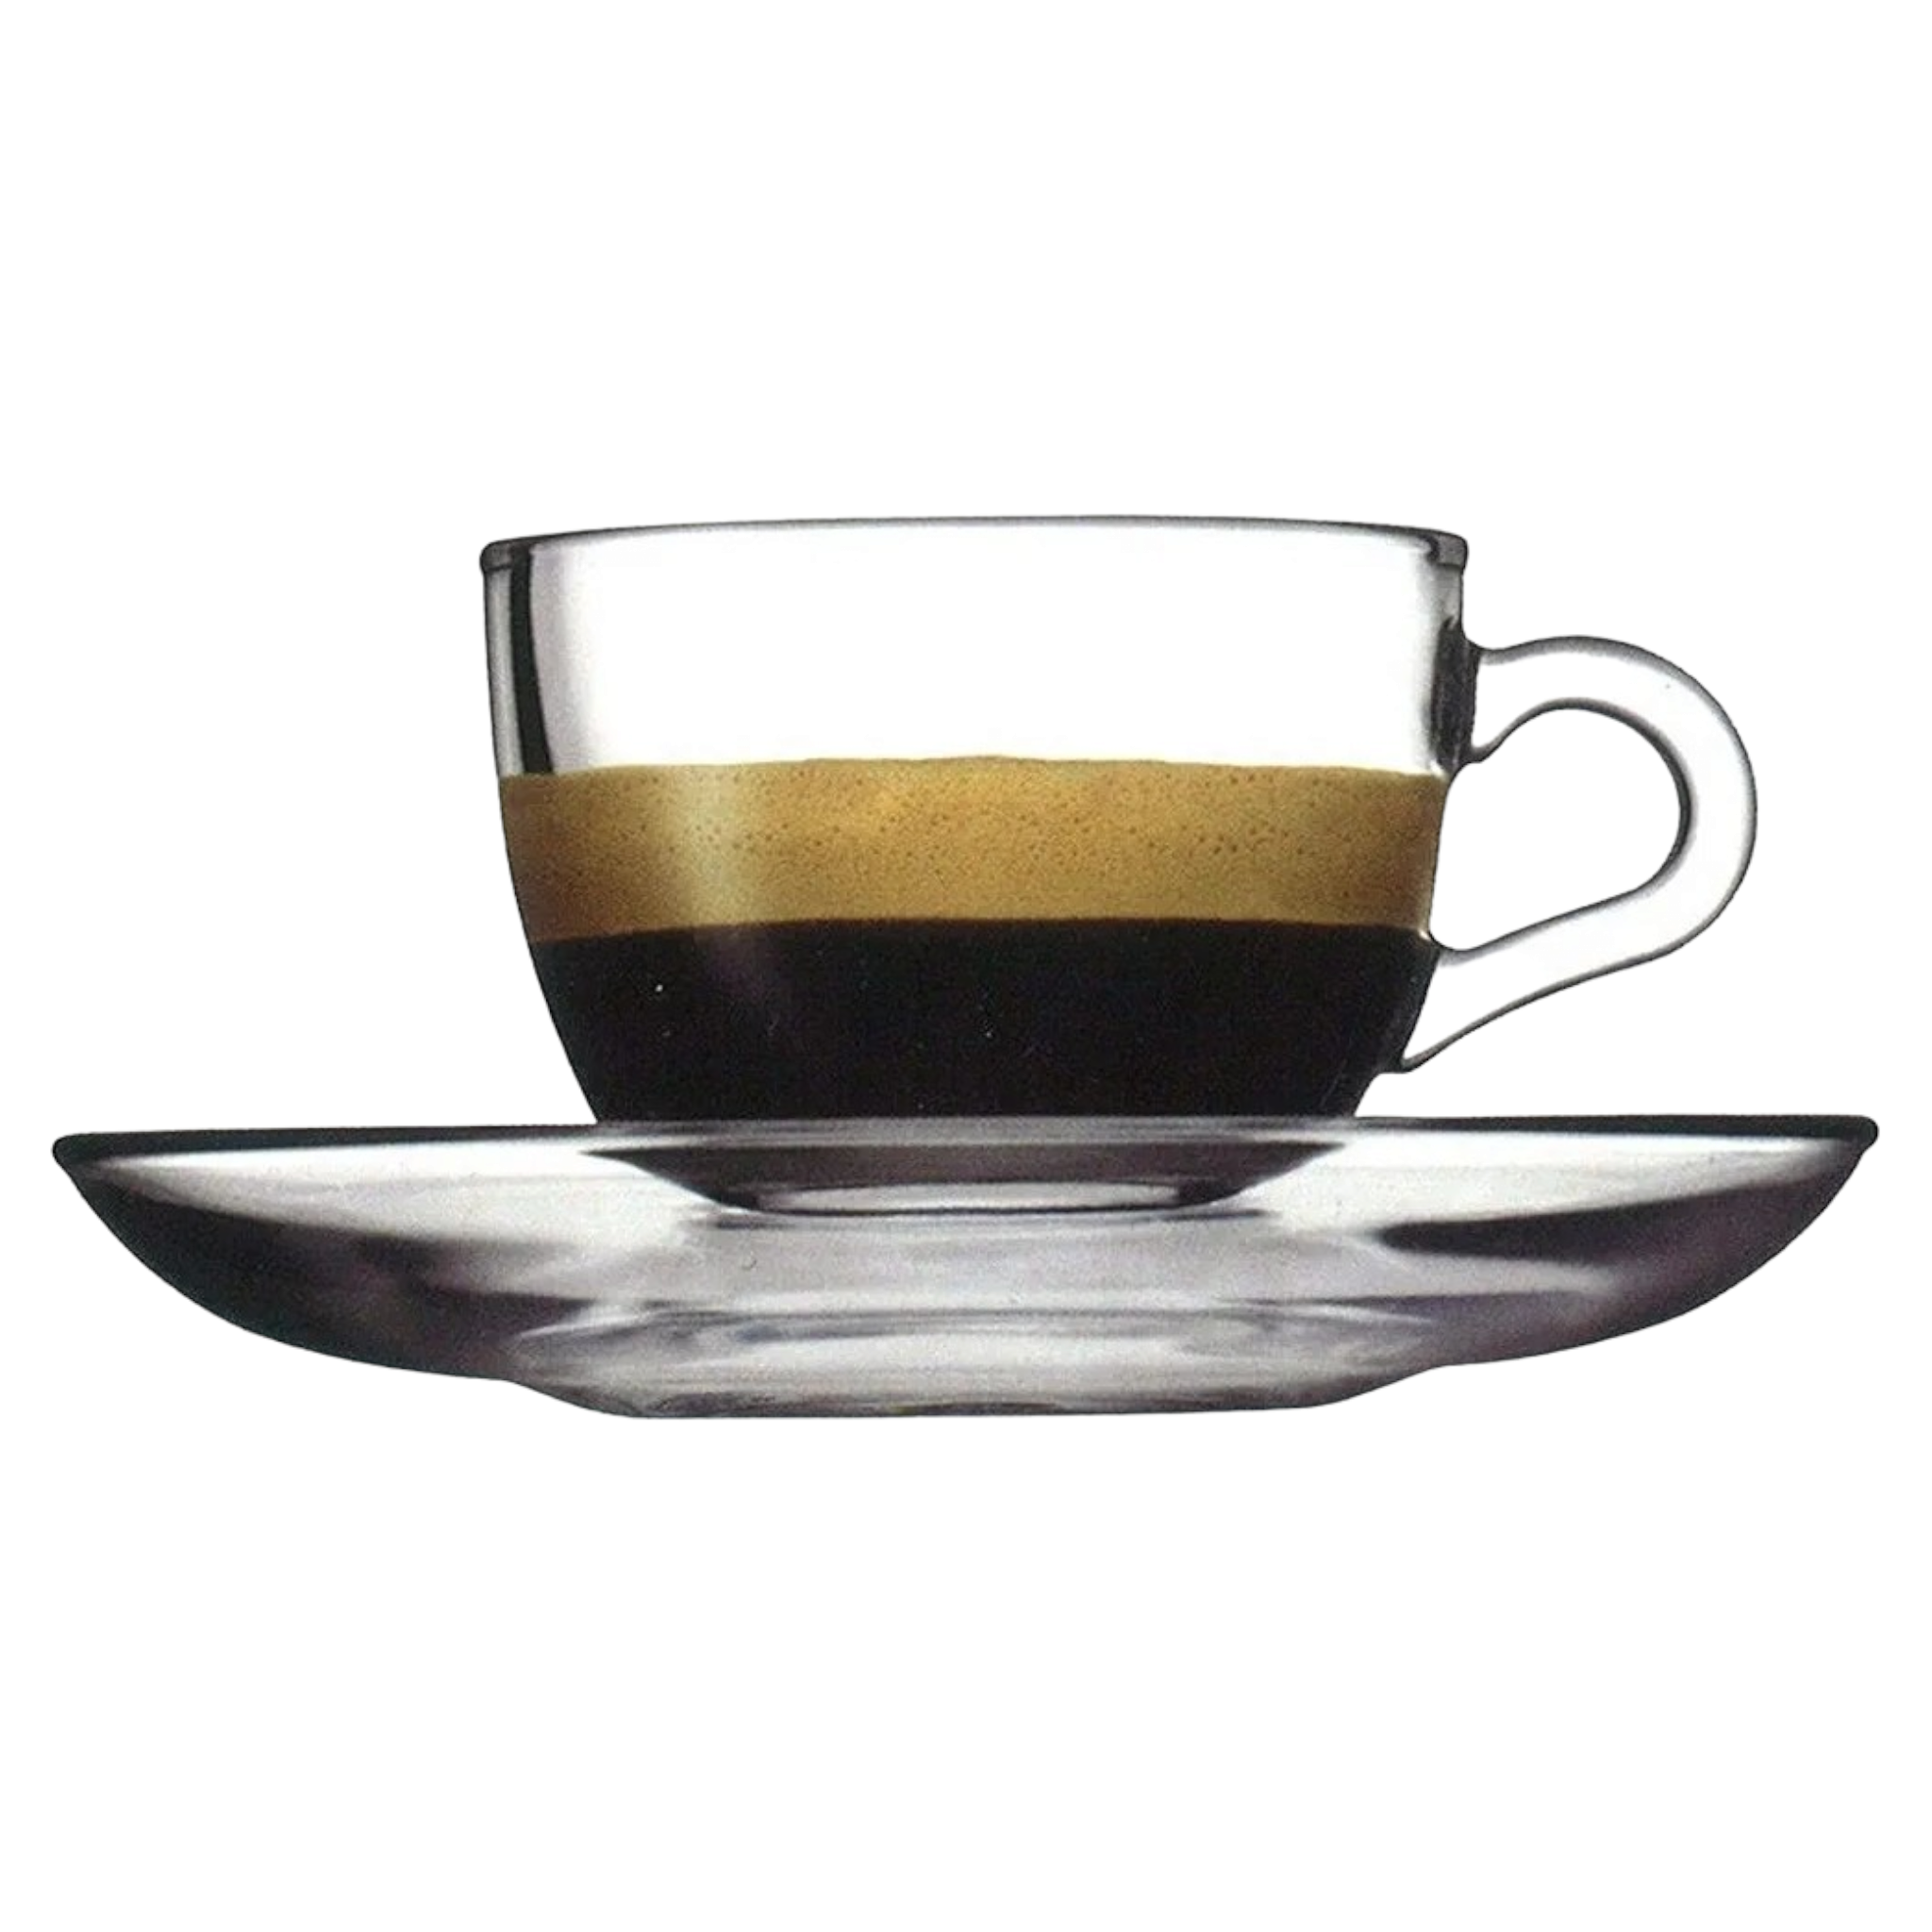 Pasabahce Espresso Cup and Saucer 85ml 6pc 23623